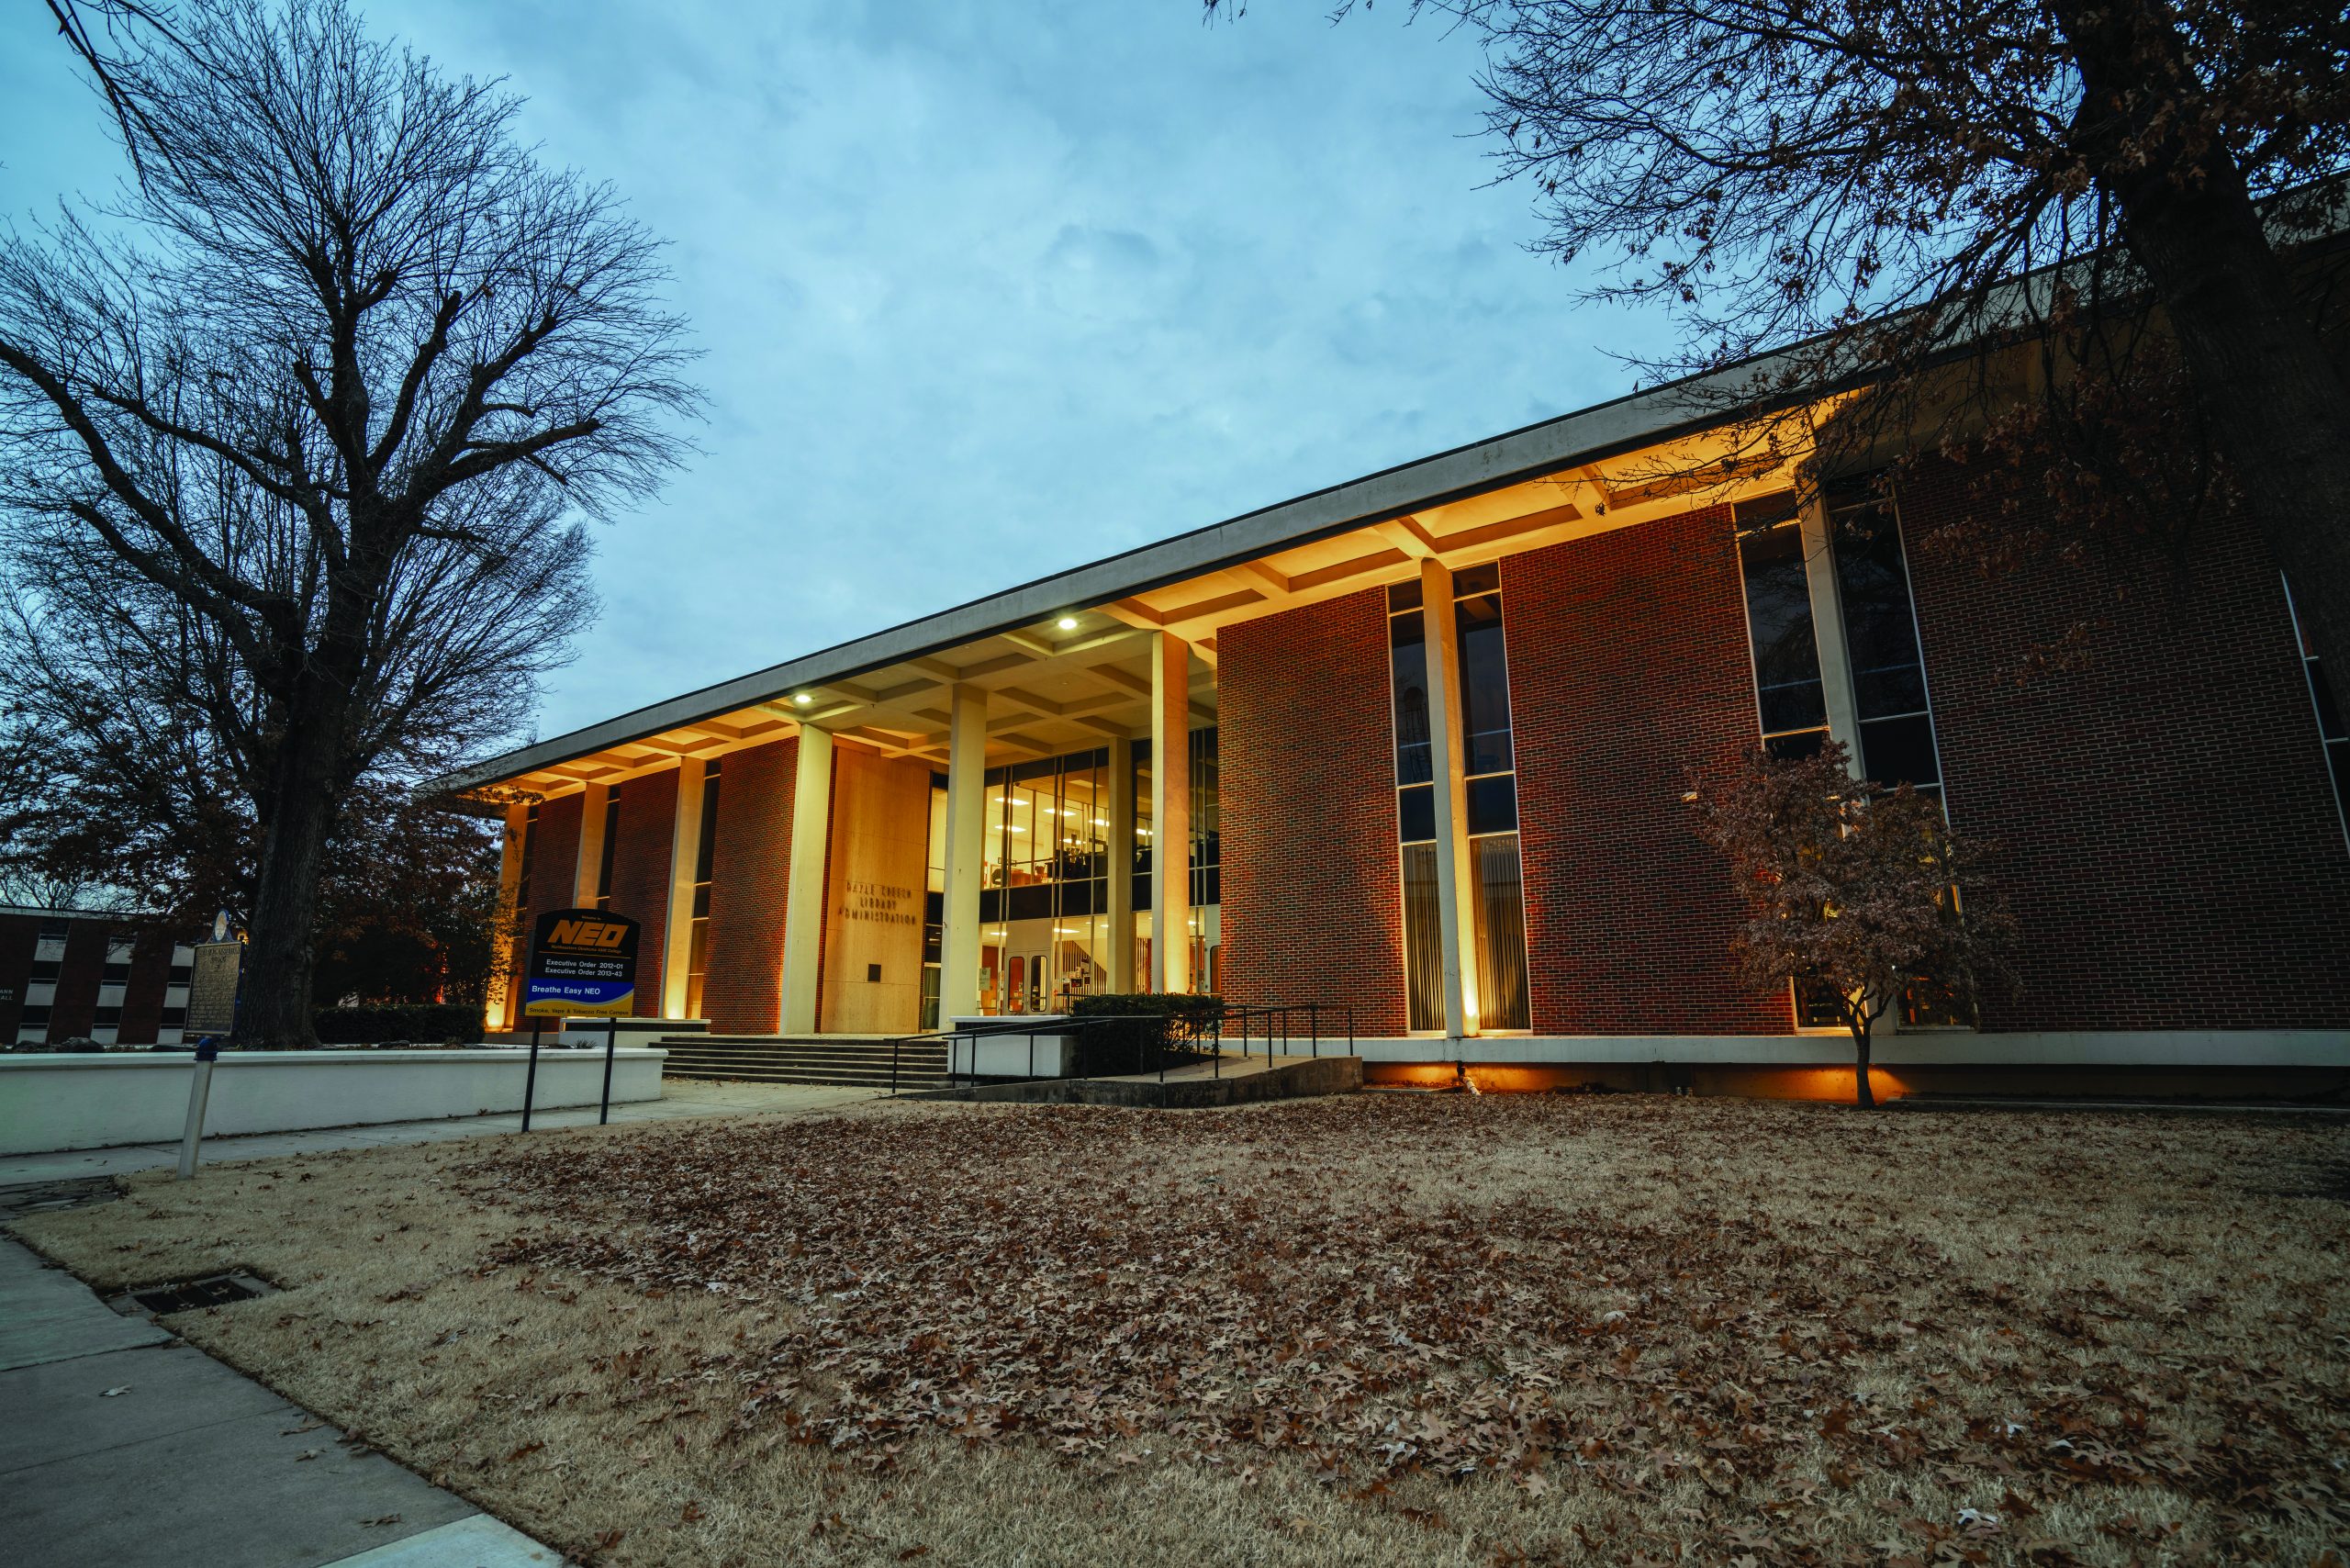 Exterior of library/admin building in the evening